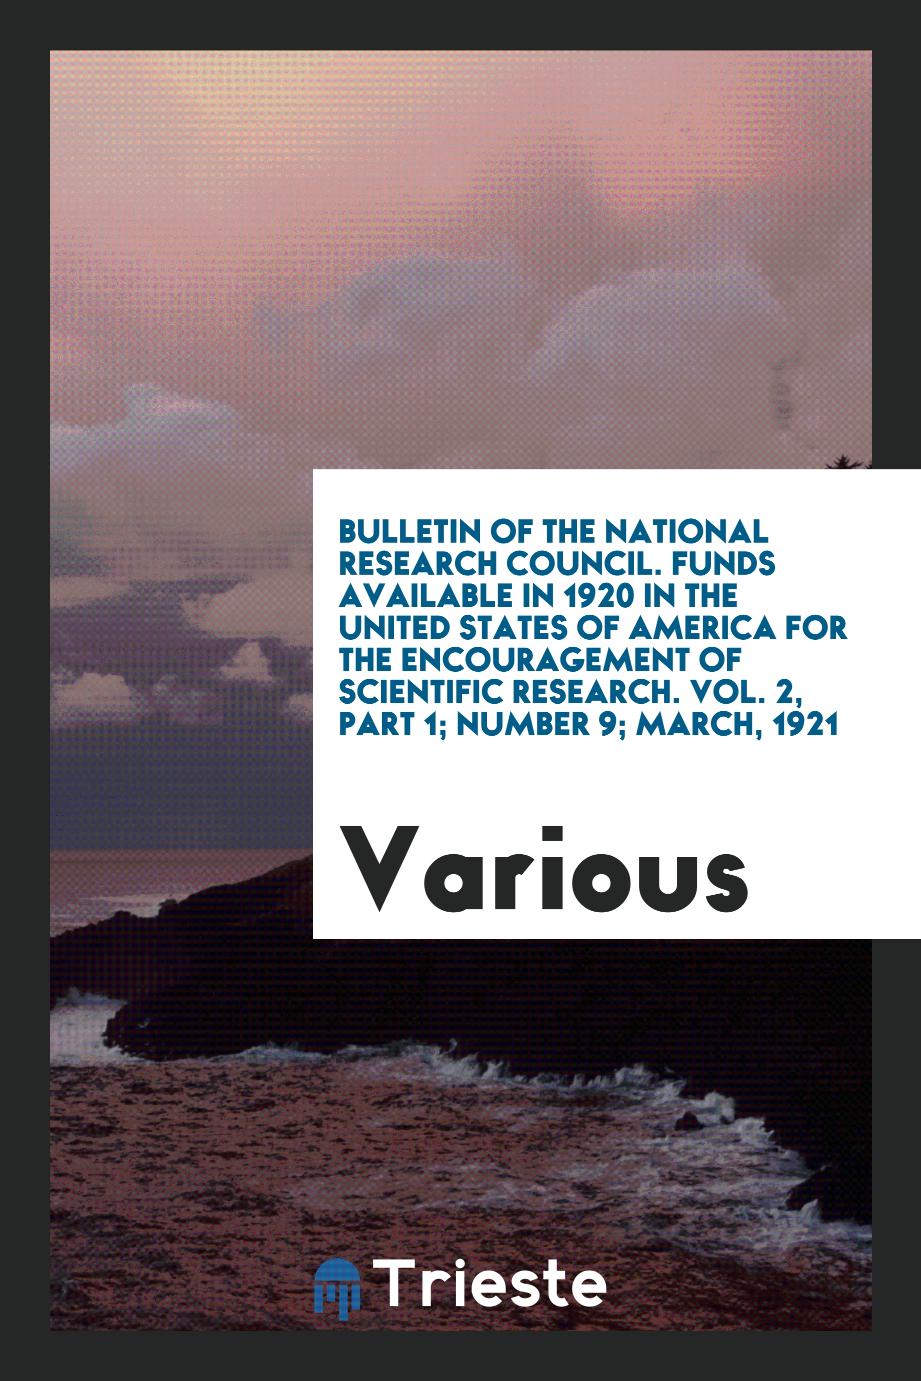 Bulletin of the National Research Council. Funds Available in 1920 in the United States of America for the Encouragement of Scientific Research. Vol. 2, part 1; Number 9; March, 1921